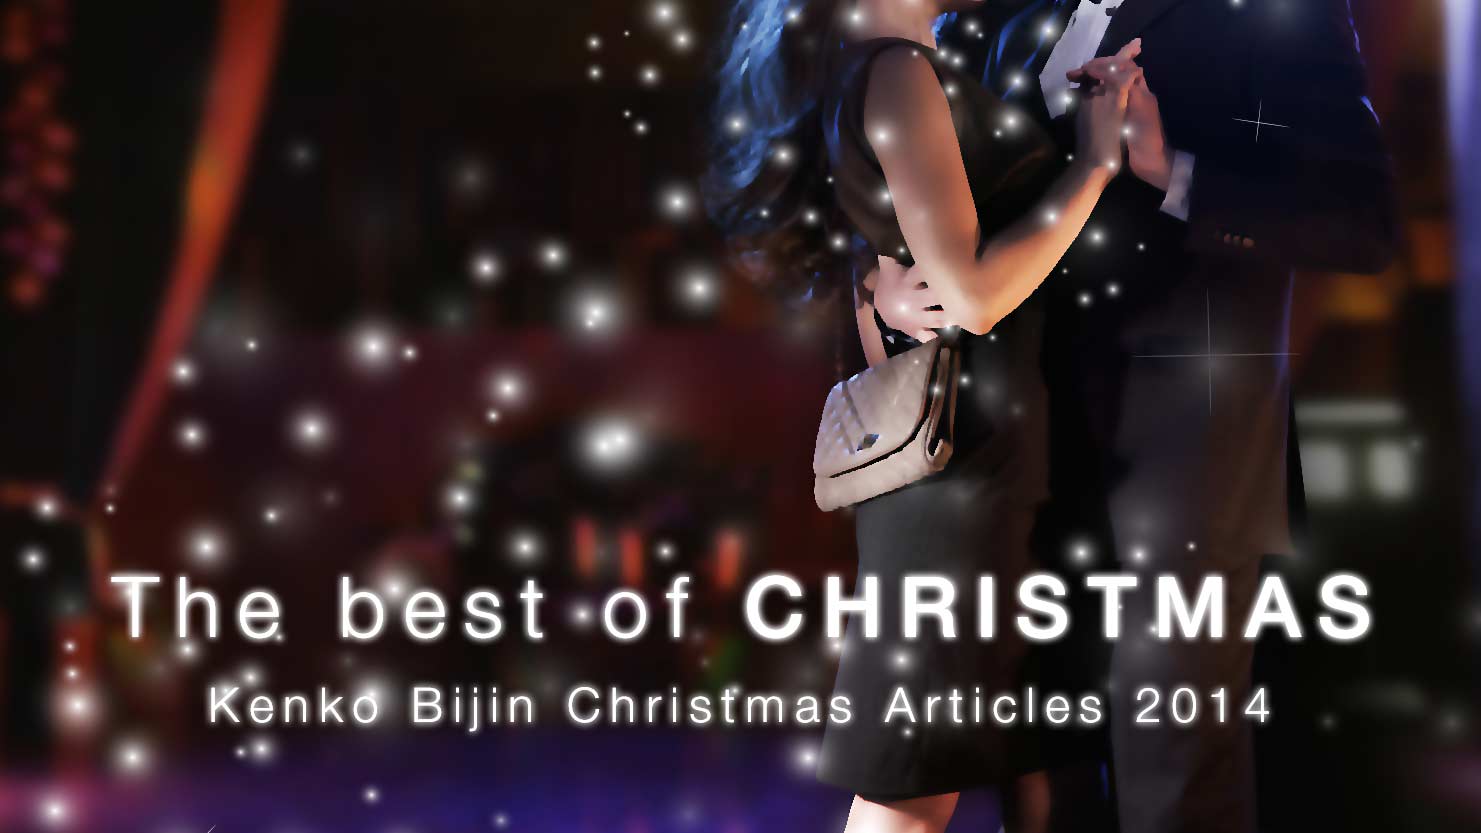 The Best of Christmas 2014